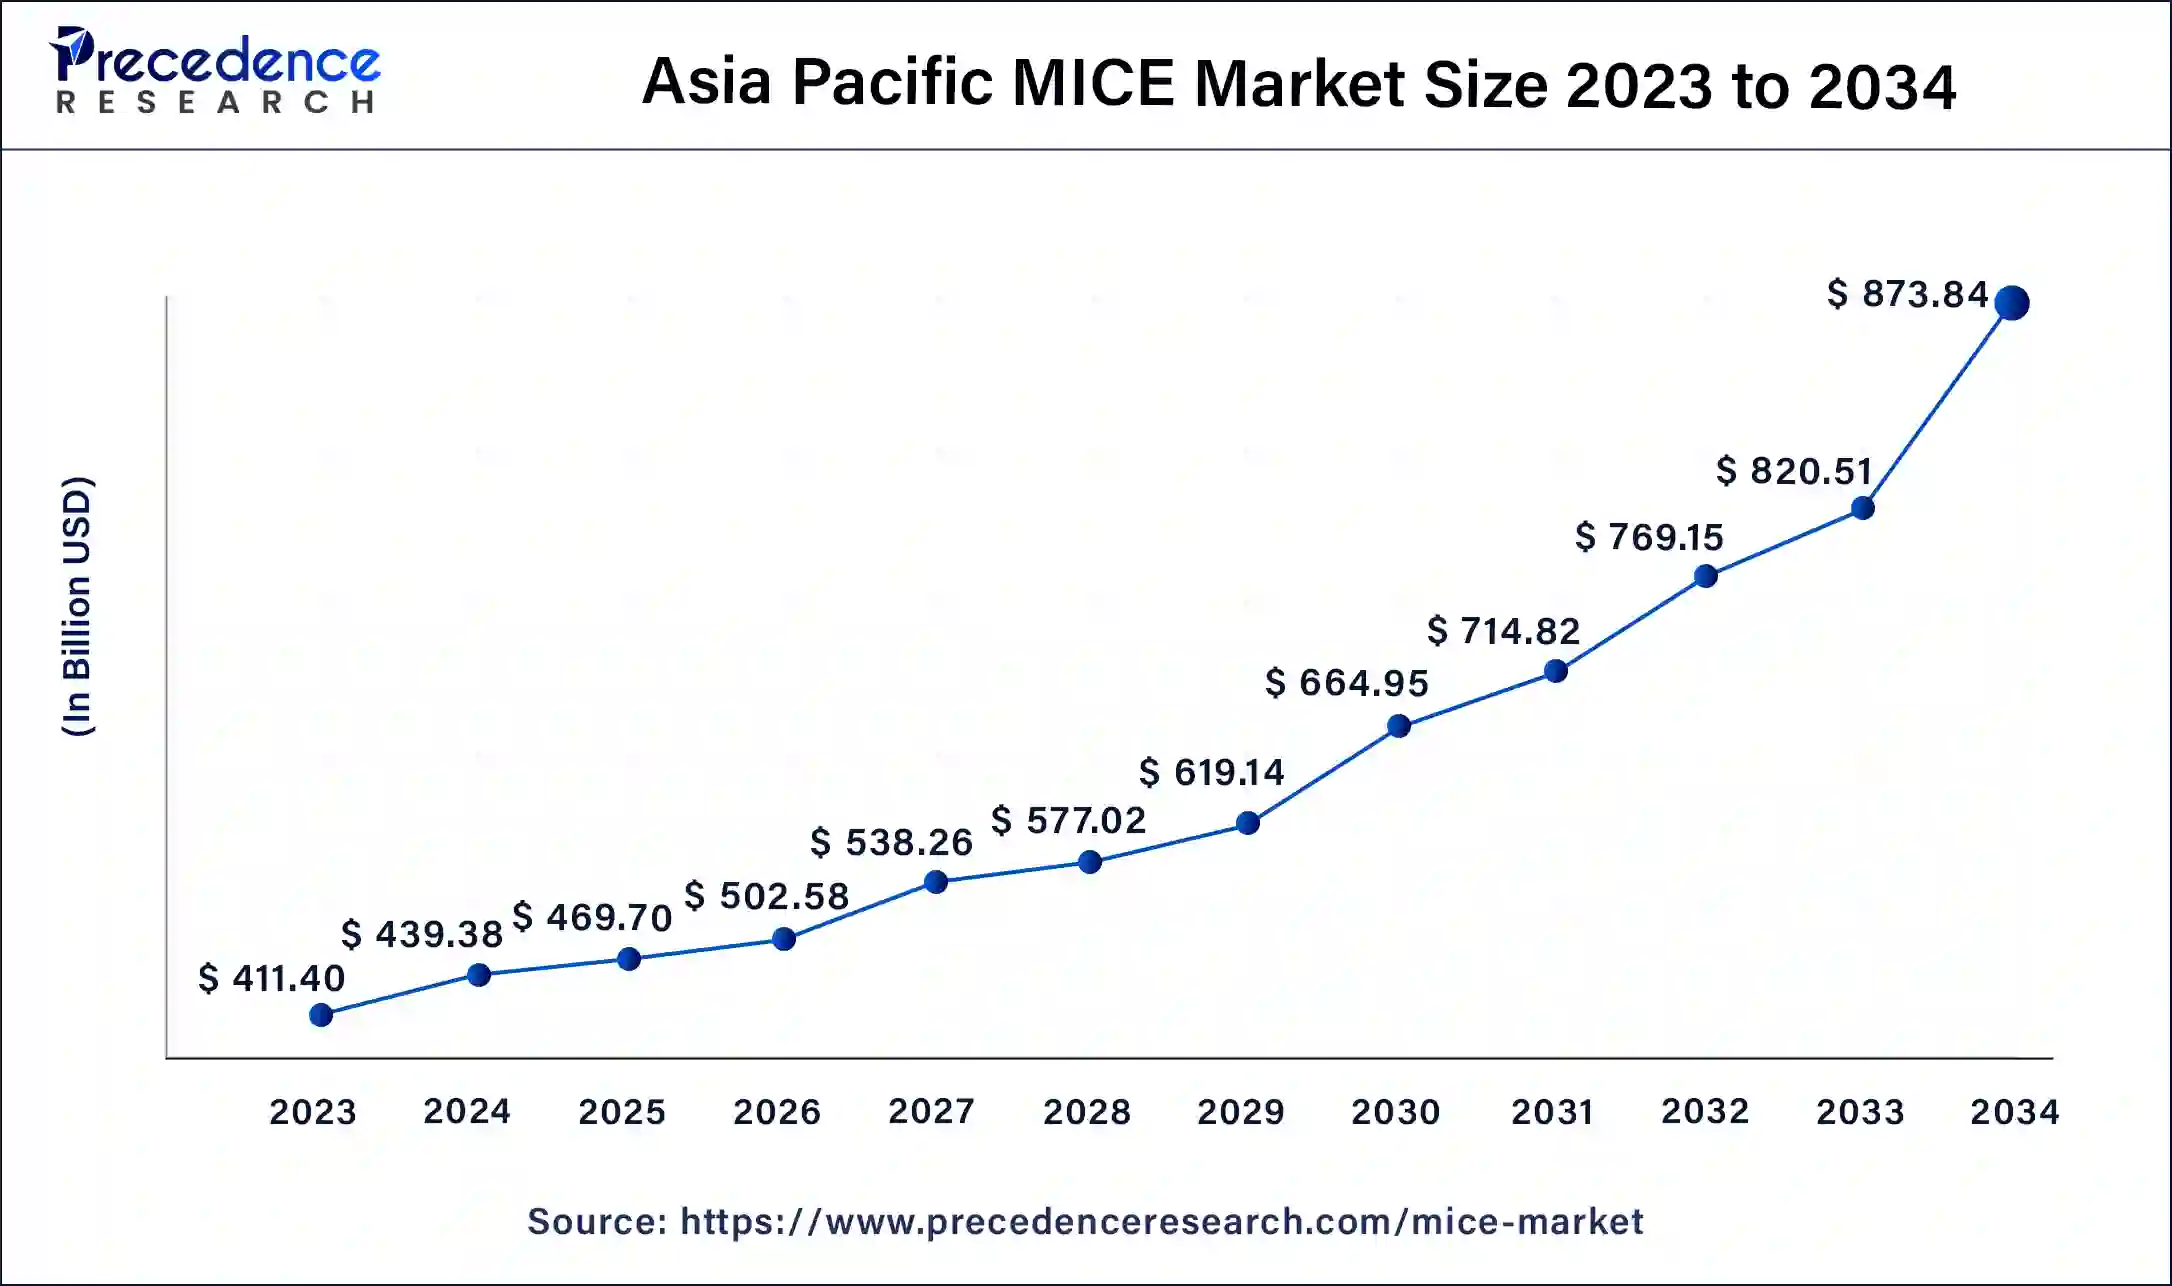 Asia Pacific MICE Market Size 2024 To 2034